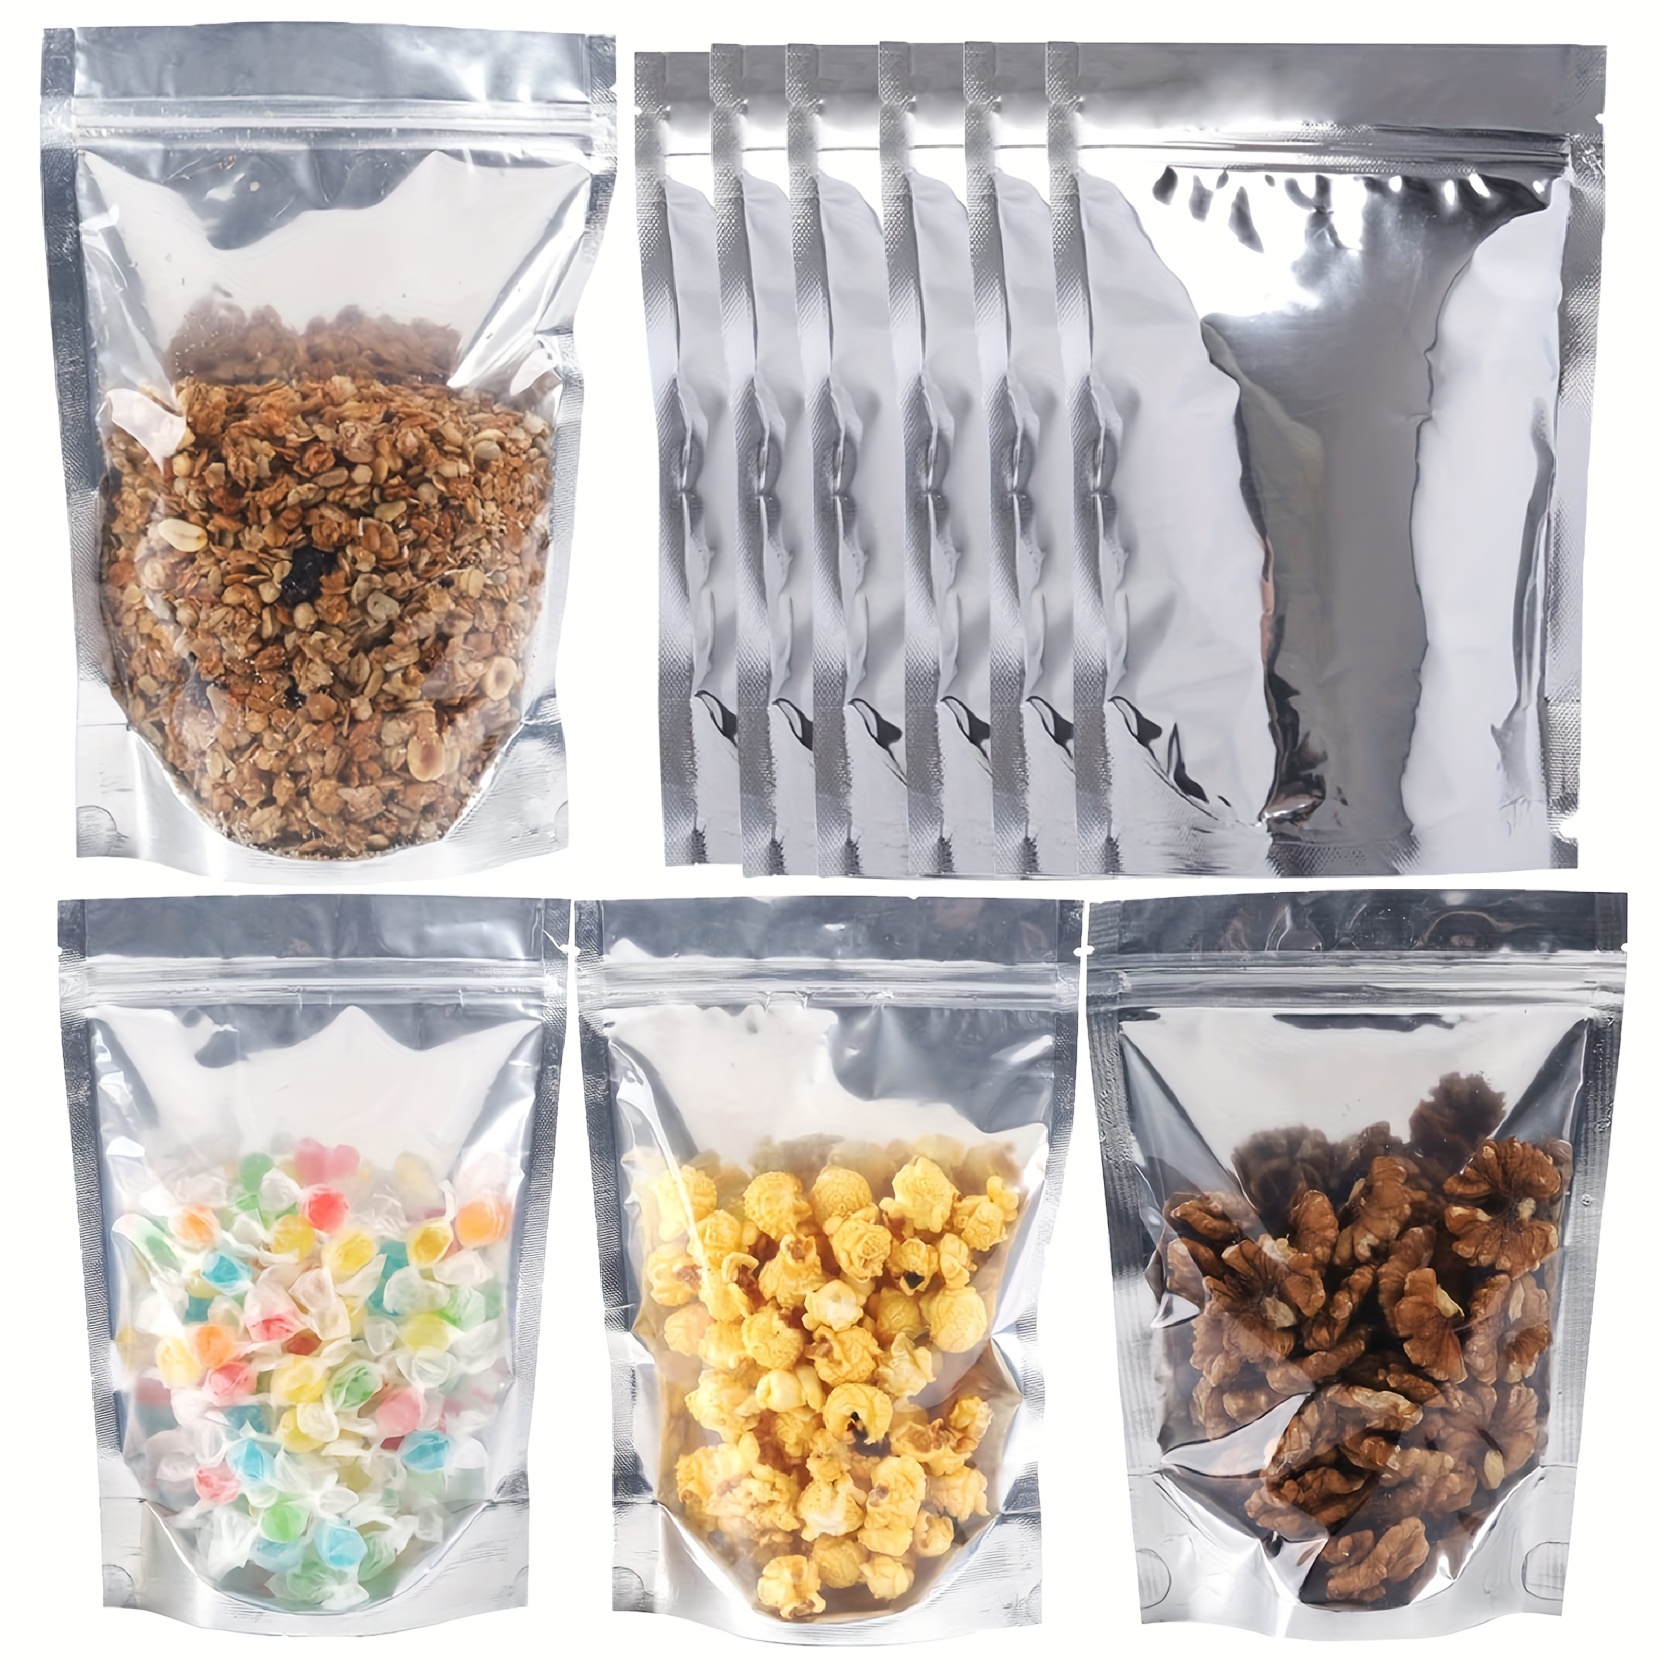 100 Pack Mylar Bag 3.5 Gram,4.7 Mil Thickness Smell Proof Bag,Stand-up Packaging Pouch,Resealable Ziplock Foil Food Storage Baggies Safe Material